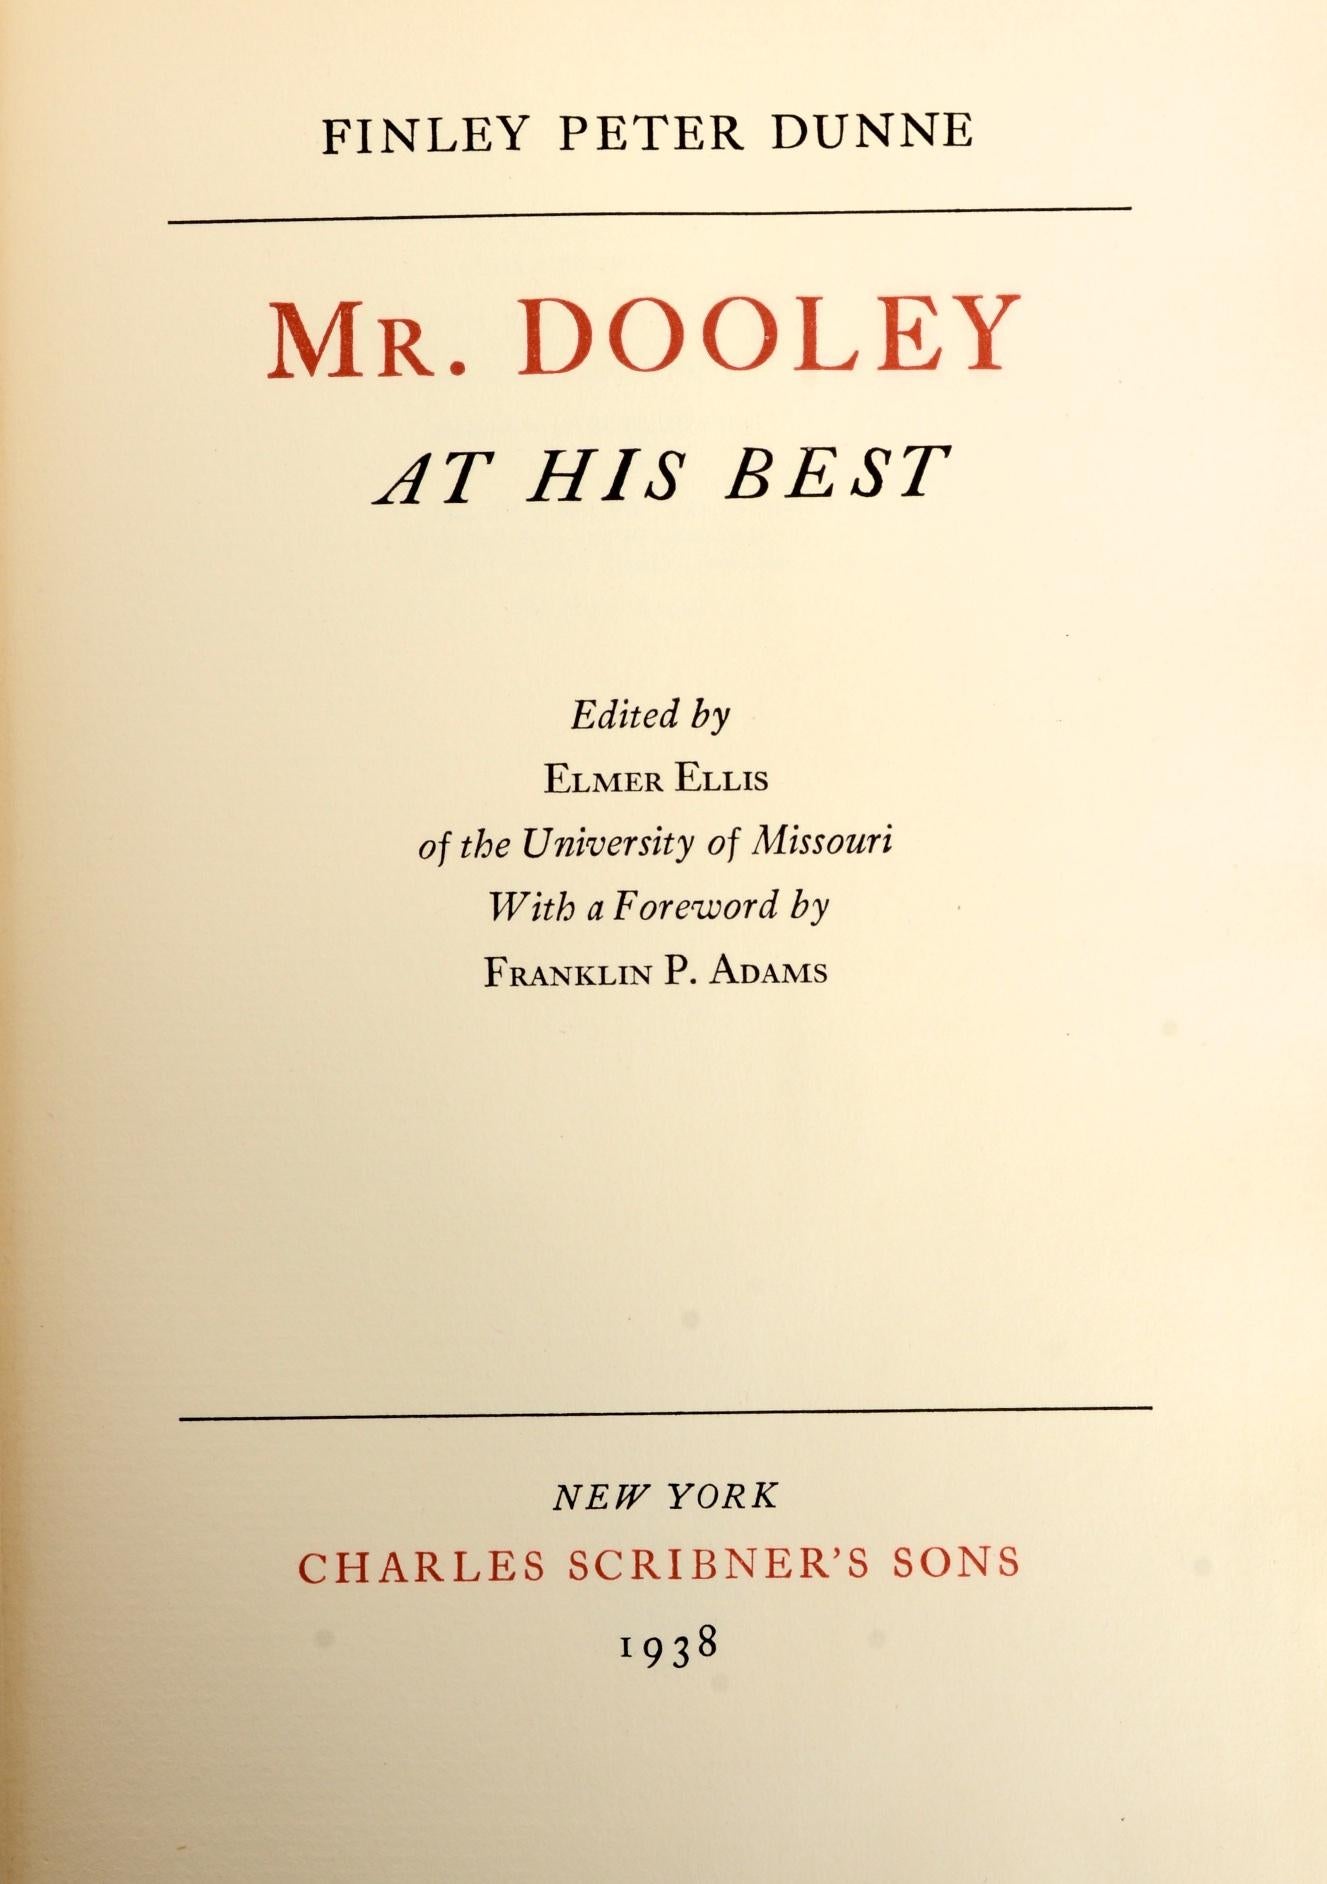 Mr. Dooley at His Best, by Finley Peter Dunne Edited by Elmer Ellis In Good Condition For Sale In valatie, NY